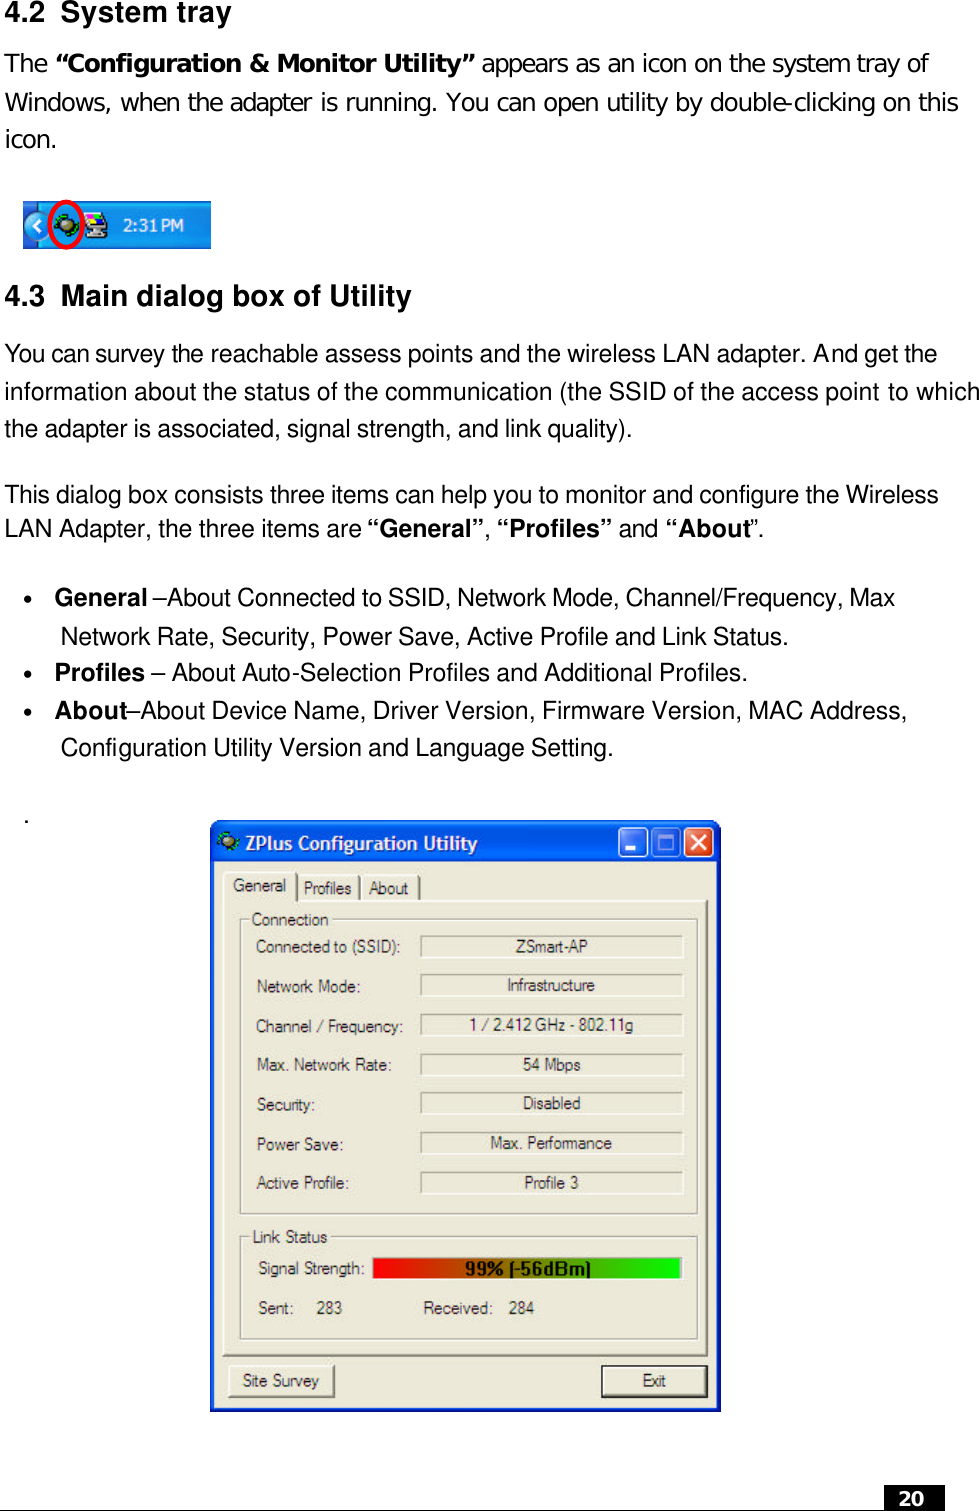  20  4.2 System tray The “Configuration &amp; Monitor Utility” appears as an icon on the system tray of Windows, when the adapter is running. You can open utility by double-clicking on this icon.    4.3 Main dialog box of Utility You can survey the reachable assess points and the wireless LAN adapter. And get the information about the status of the communication (the SSID of the access point to which the adapter is associated, signal strength, and link quality).   This dialog box consists three items can help you to monitor and configure the Wireless LAN Adapter, the three items are “General”, “Profiles” and “About”. • General –About Connected to SSID, Network Mode, Channel/Frequency, Max Network Rate, Security, Power Save, Active Profile and Link Status. • Profiles – About Auto-Selection Profiles and Additional Profiles. • About–About Device Name, Driver Version, Firmware Version, MAC Address, Configuration Utility Version and Language Setting. .          